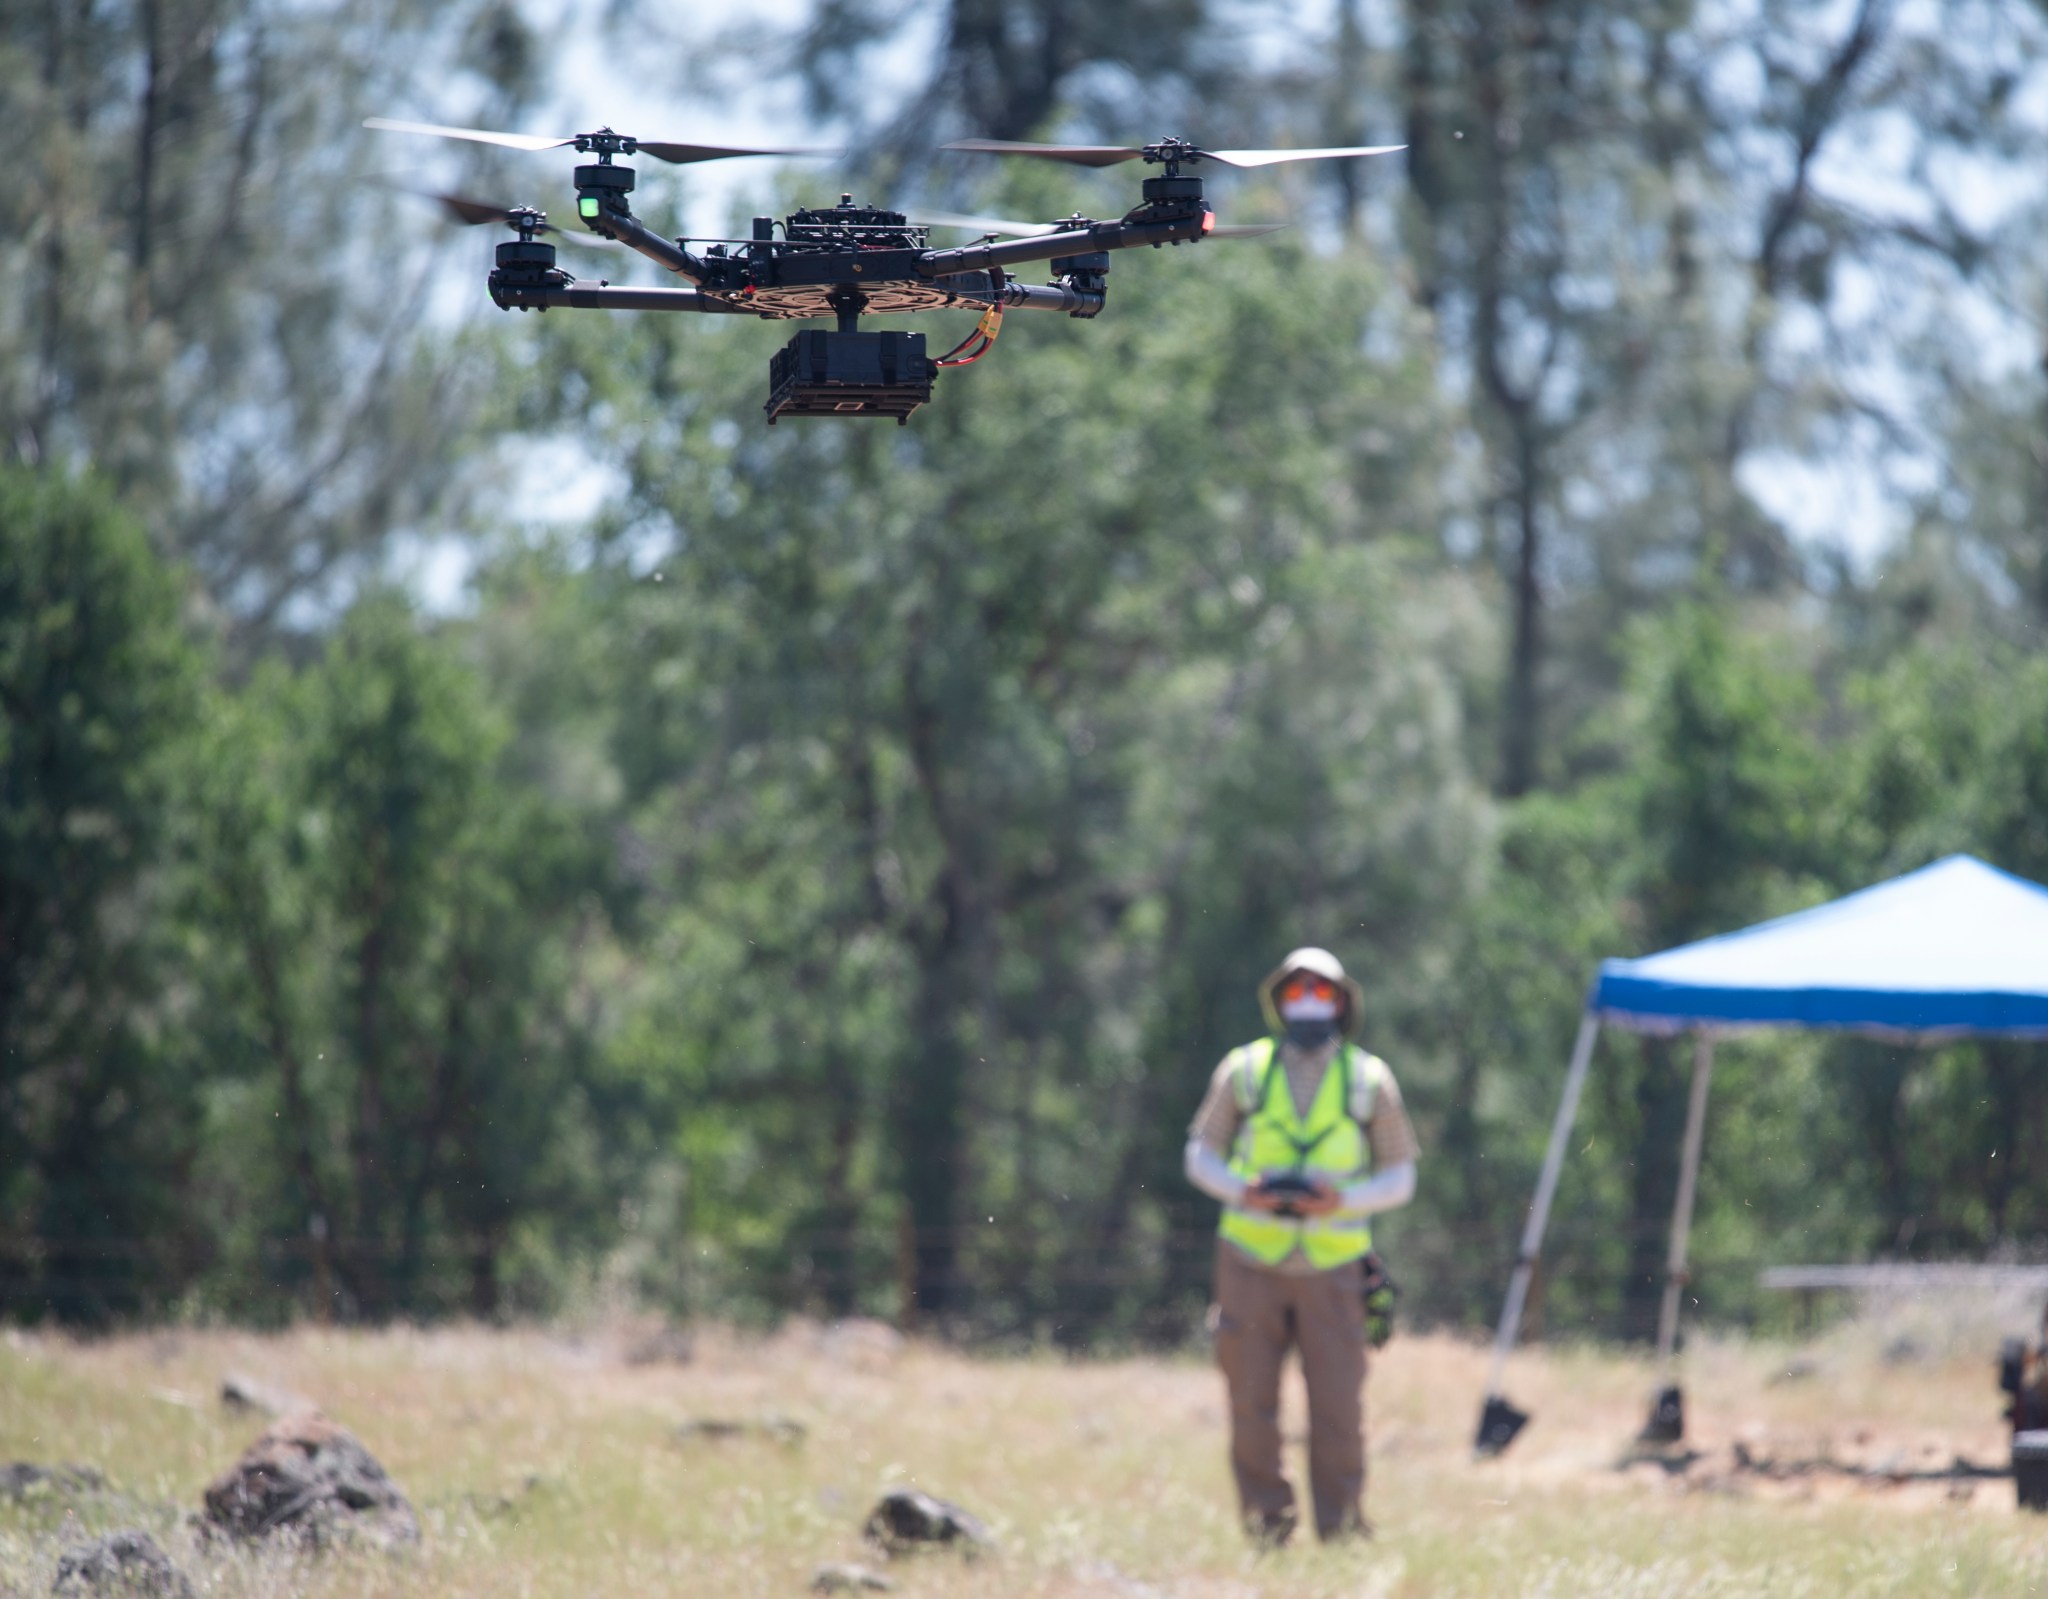 A quadcopter drone in flight in the foreground, with the pilot wearing a yellow vest in the background against a stand of trees.